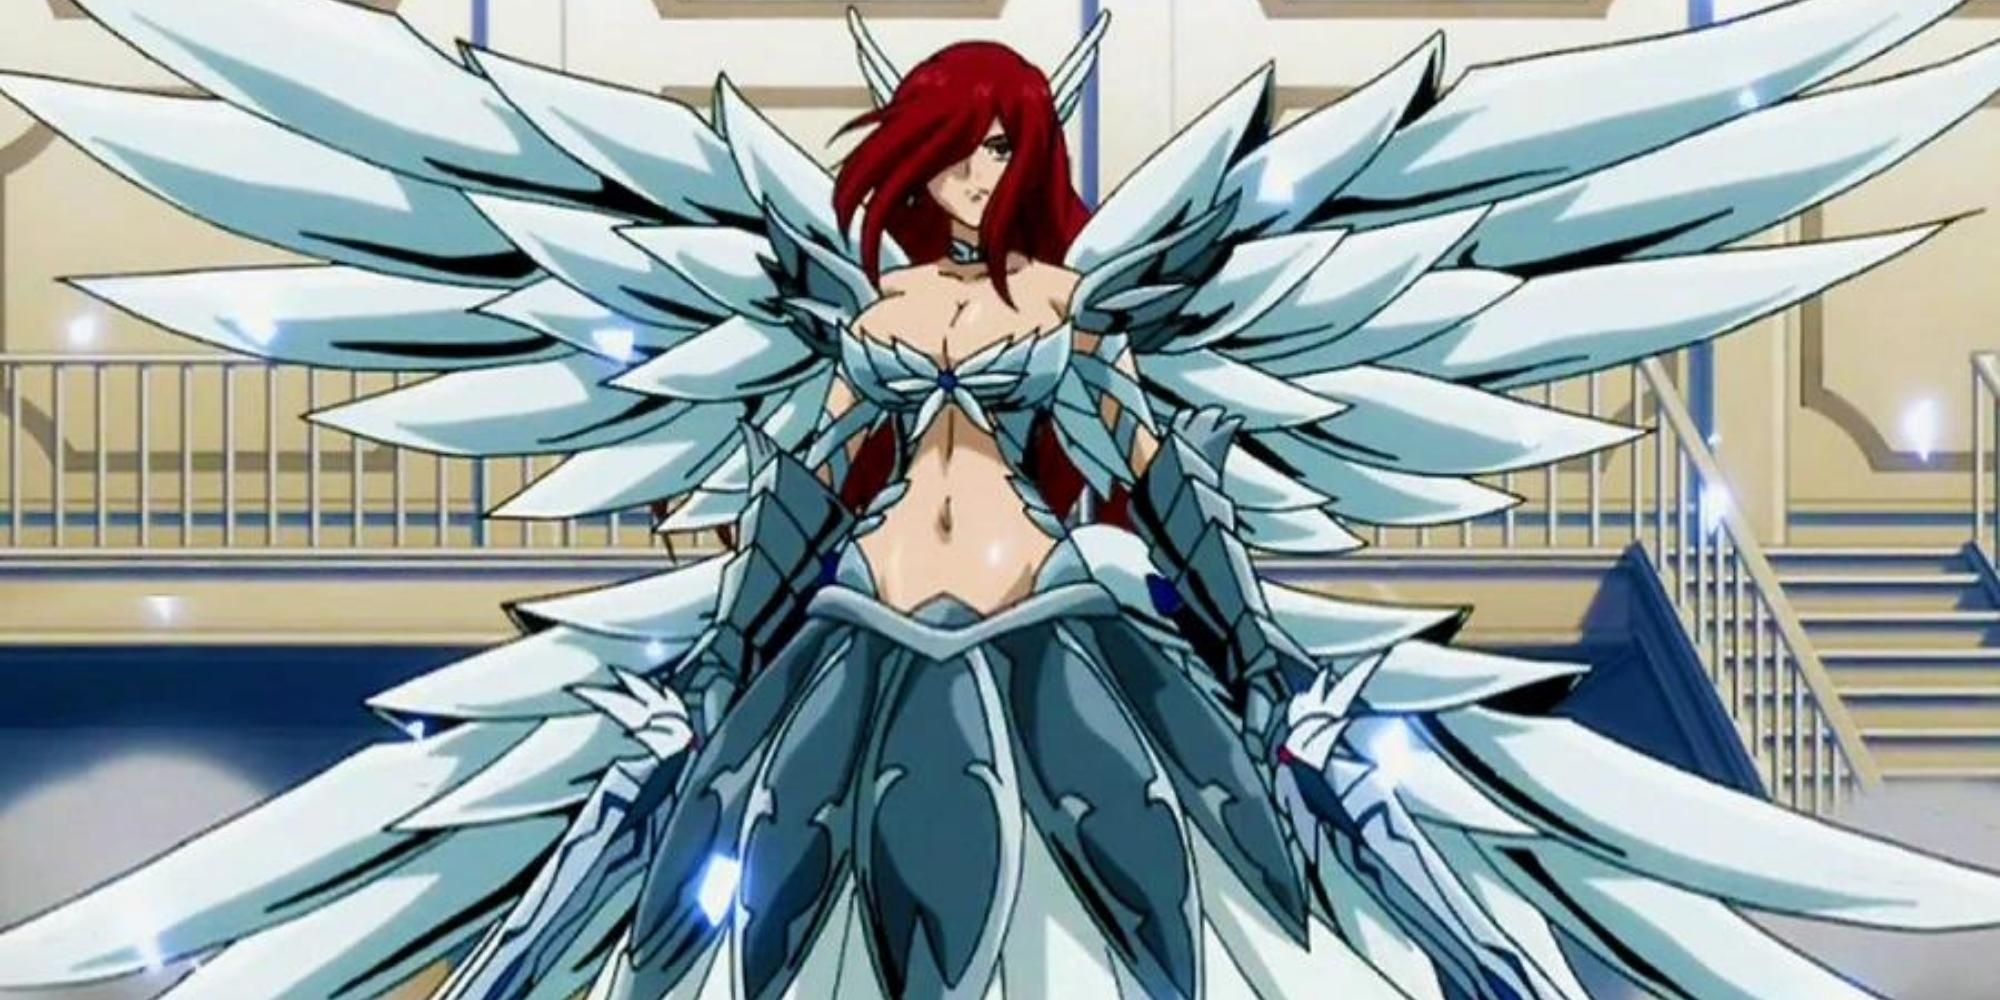  Erza Scarlet in Fairy Tail